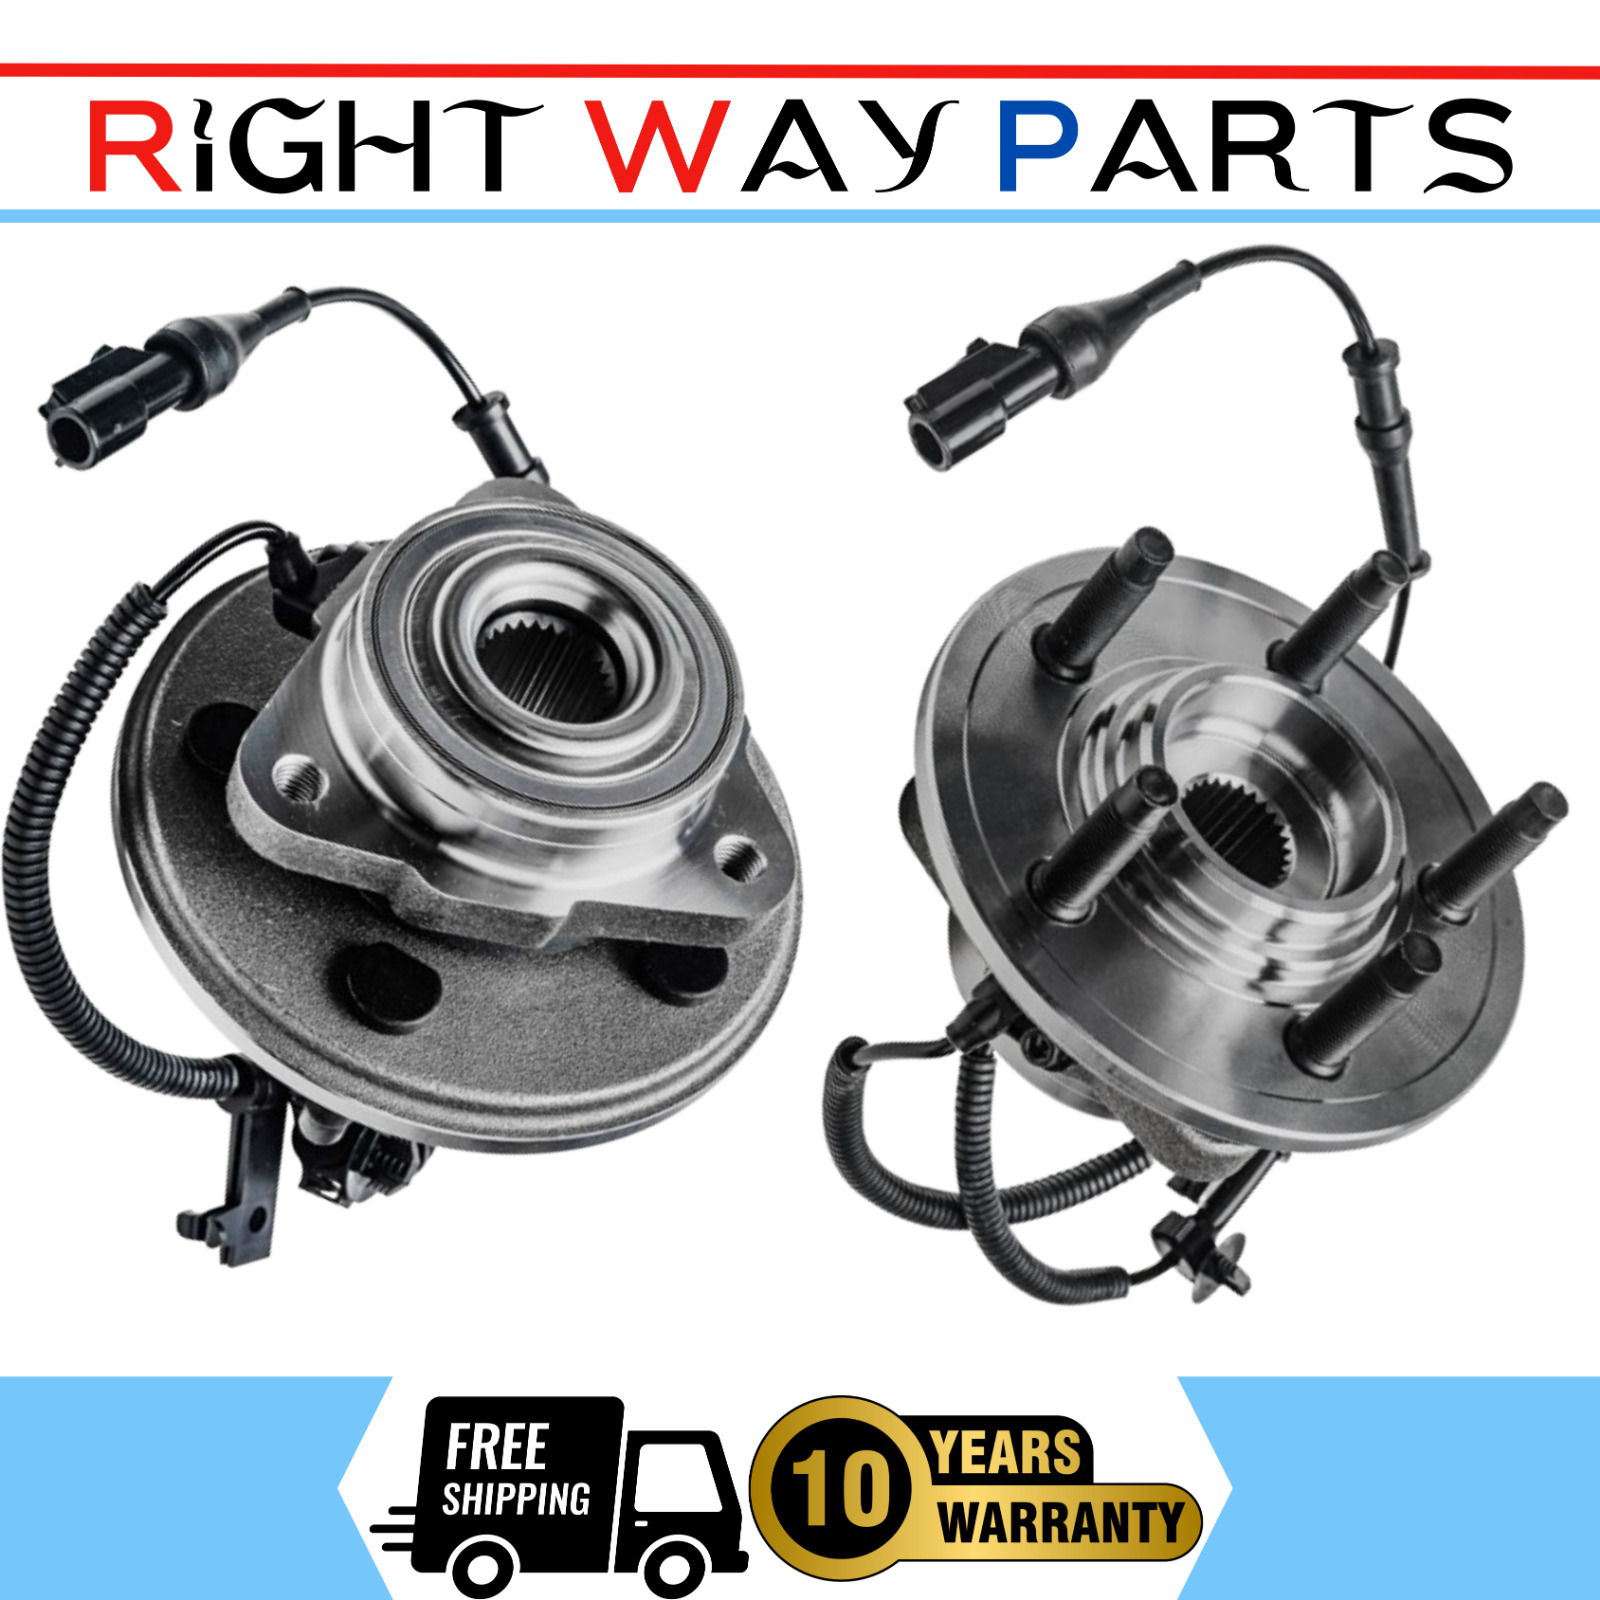 2x Front Wheel Hub Bearings for 2006-2010 Ford Explorer Mercury Mountaineer Trac